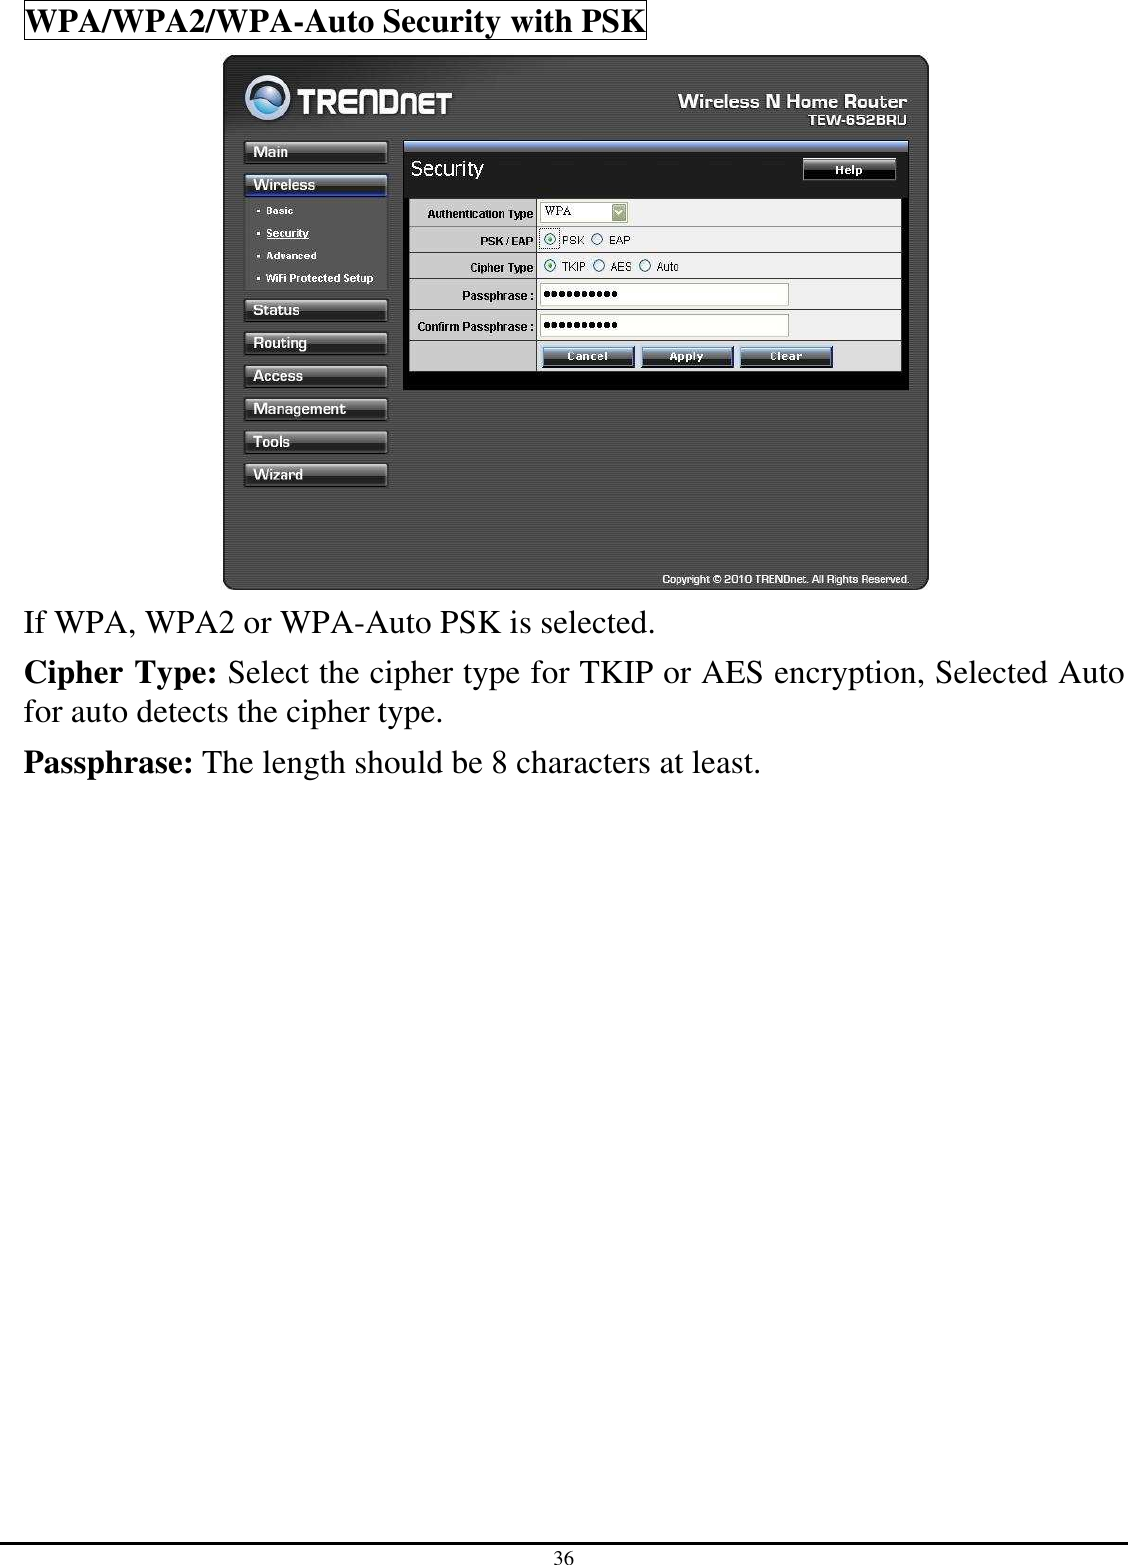 36 WPA/WPA2/WPA-Auto Security with PSK  If WPA, WPA2 or WPA-Auto PSK is selected. Cipher Type: Select the cipher type for TKIP or AES encryption, Selected Auto for auto detects the cipher type.  Passphrase: The length should be 8 characters at least.               